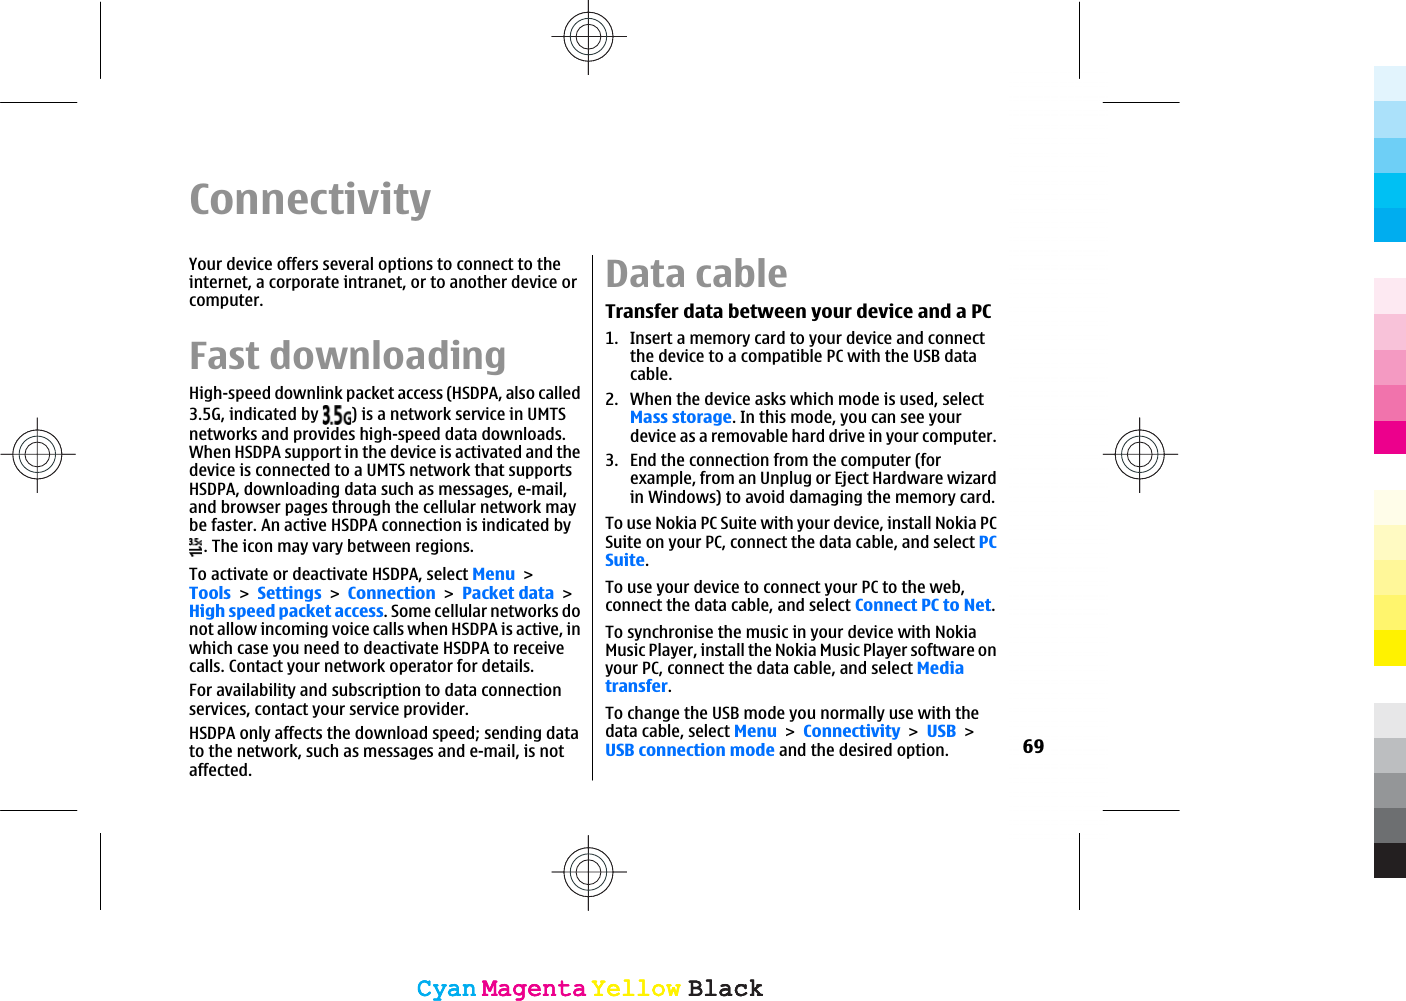 ConnectivityYour device offers several options to connect to theinternet, a corporate intranet, or to another device orcomputer.Fast downloadingHigh-speed downlink packet access (HSDPA, also called3.5G, indicated by  ) is a network service in UMTSnetworks and provides high-speed data downloads.When HSDPA support in the device is activated and thedevice is connected to a UMTS network that supportsHSDPA, downloading data such as messages, e-mail,and browser pages through the cellular network maybe faster. An active HSDPA connection is indicated by. The icon may vary between regions.To activate or deactivate HSDPA, select MenuToolsSettingsConnectionPacket dataHigh speed packet access. Some cellular networks donot allow incoming voice calls when HSDPA is active, inwhich case you need to deactivate HSDPA to receivecalls. Contact your network operator for details.For availability and subscription to data connectionservices, contact your service provider.HSDPA only affects the download speed; sending datato the network, such as messages and e-mail, is notaffected.Data cableTransfer data between your device and a PC1. Insert a memory card to your device and connectthe device to a compatible PC with the USB datacable.2. When the device asks which mode is used, selectMass storage. In this mode, you can see yourdevice as a removable hard drive in your computer.3. End the connection from the computer (forexample, from an Unplug or Eject Hardware wizardin Windows) to avoid damaging the memory card.To use Nokia PC Suite with your device, install Nokia PCSuite on your PC, connect the data cable, and select PCSuite.To use your device to connect your PC to the web,connect the data cable, and select Connect PC to Net.To synchronise the music in your device with NokiaMusic Player, install the Nokia Music Player software onyour PC, connect the data cable, and select Mediatransfer.To change the USB mode you normally use with thedata cable, select MenuConnectivityUSBUSB connection mode and the desired option. 69CyanCyanMagentaMagentaYellowYellowBlackBlackCyanCyanMagentaMagentaYellowYellowBlackBlack